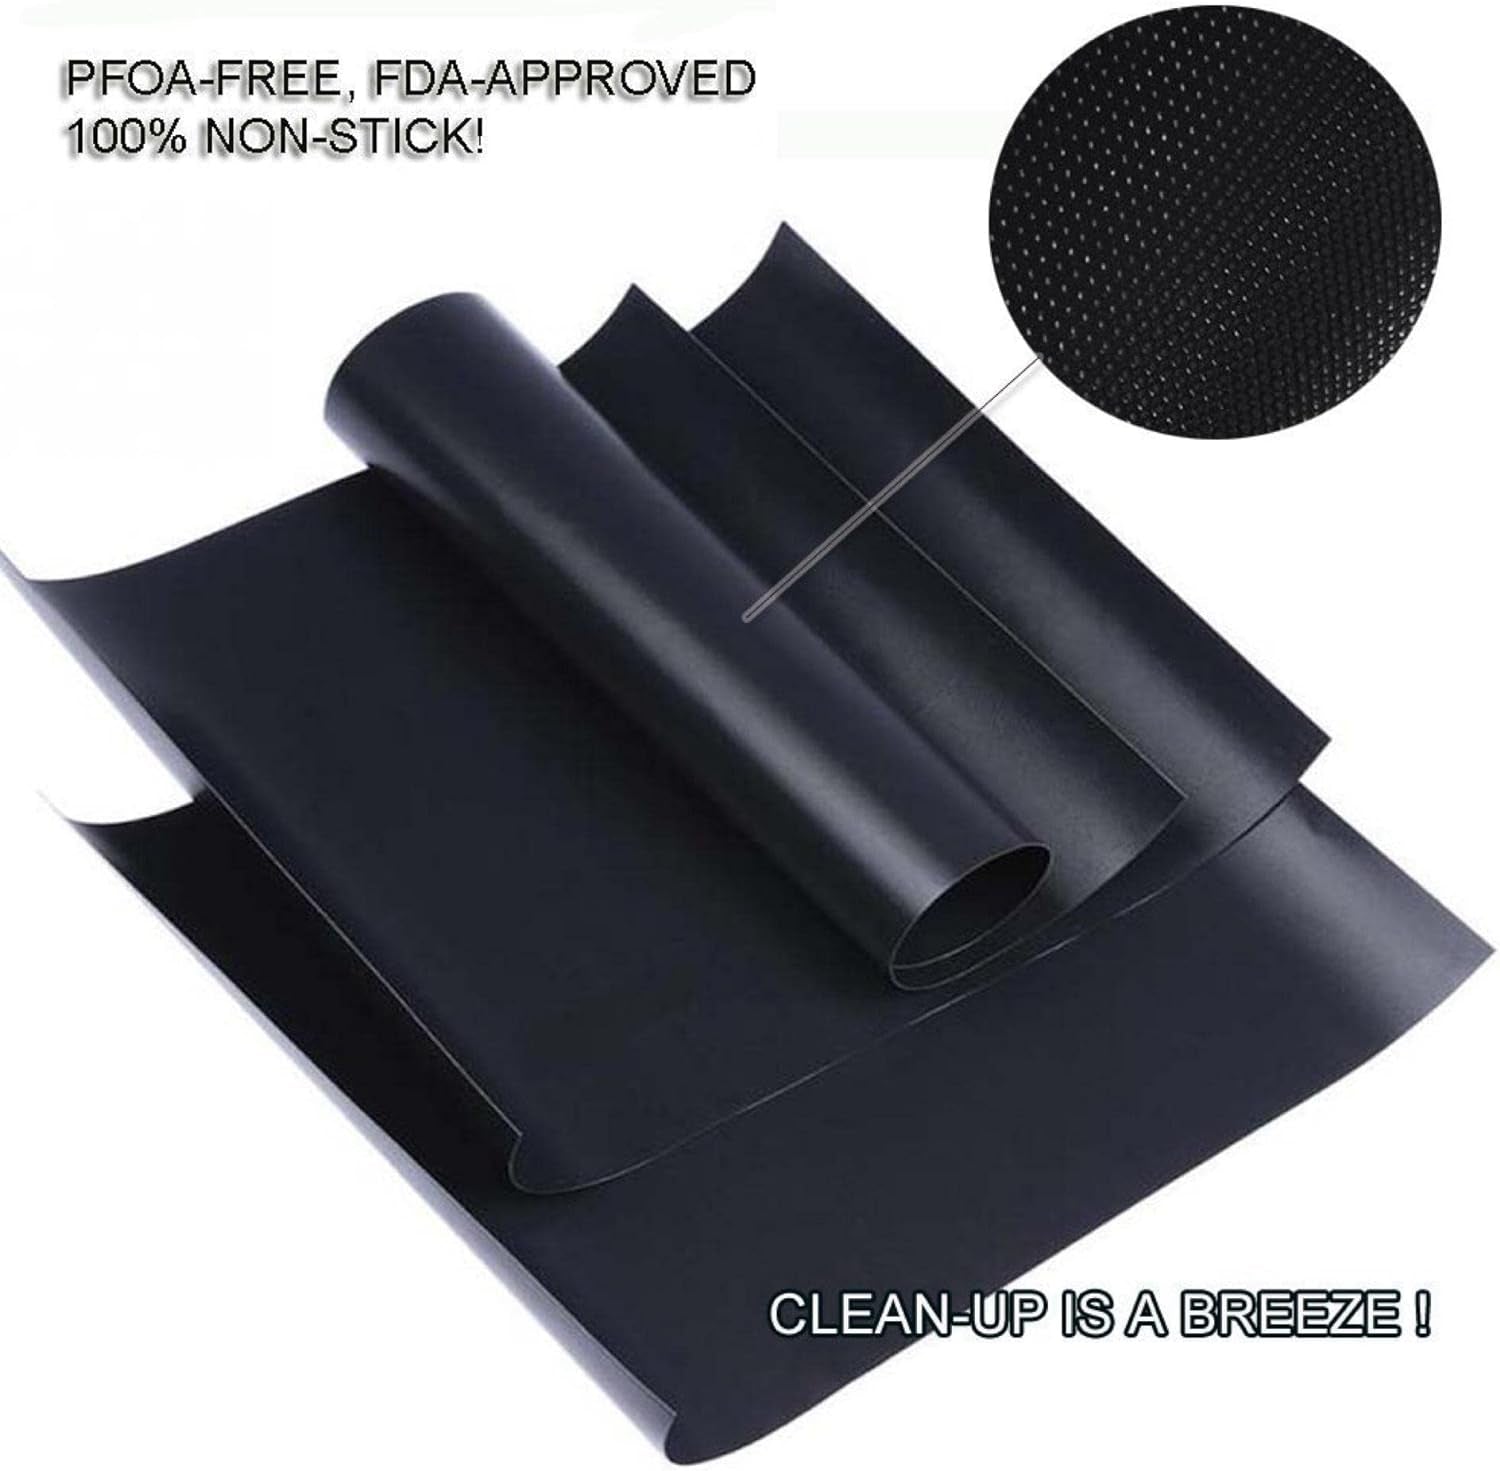 Grill Mat Set of 6 - 100% Non-Stick Reusable Mats for Gas, Charcoal or Electric Grills - Easy to Clean - 15.75 X 13-Inch, Black